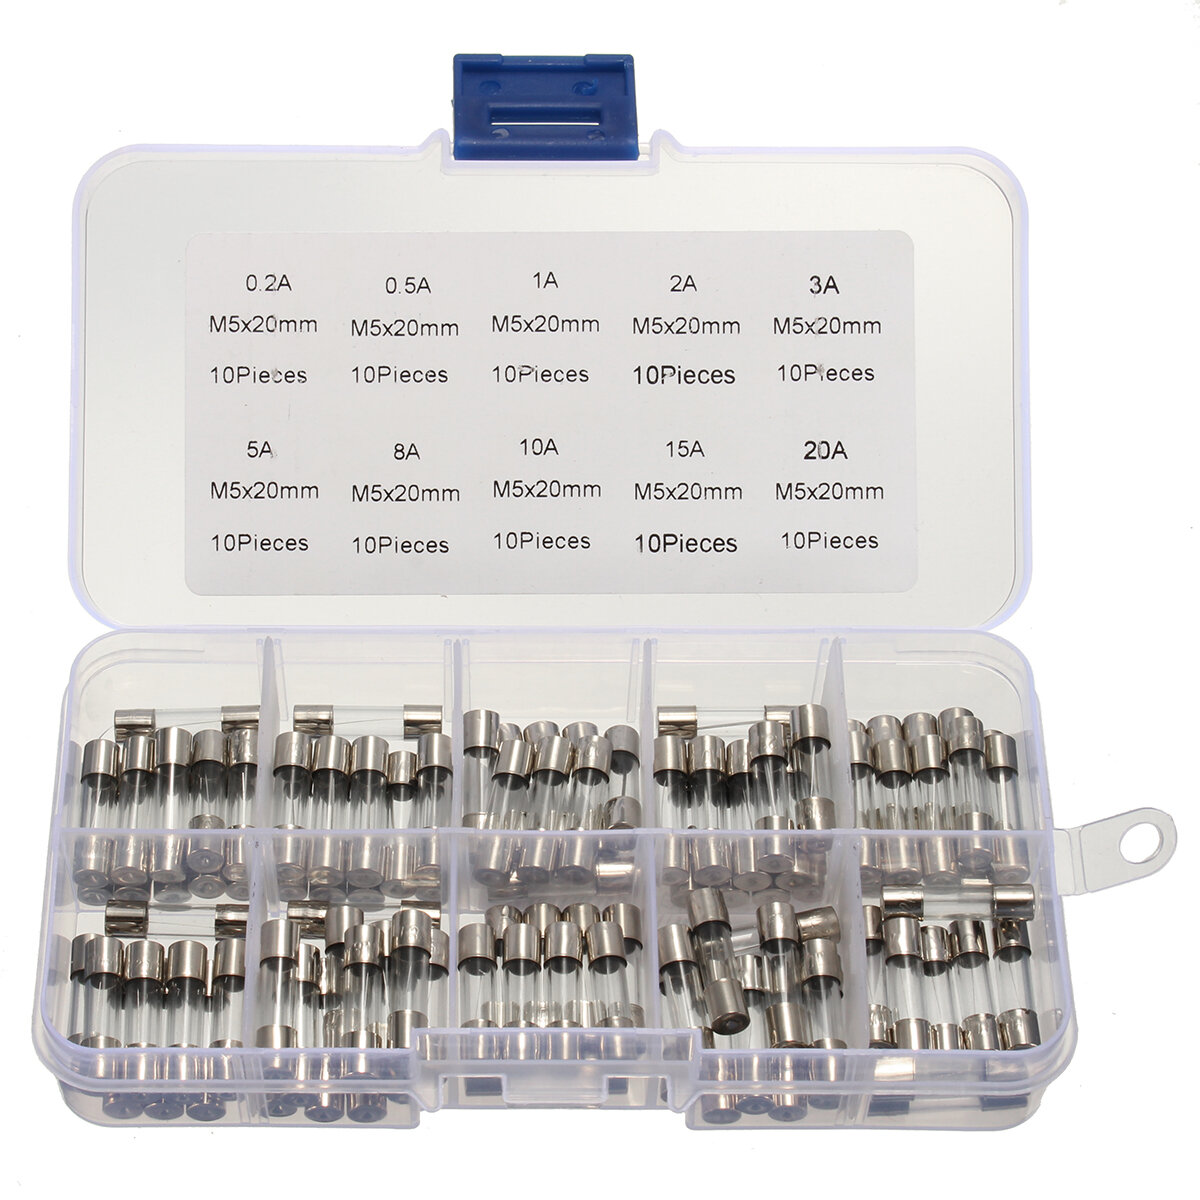 best price,100pcs,5x20mm,0.2a,20a,quick,blow,glass,tube,fuse,kit,discount